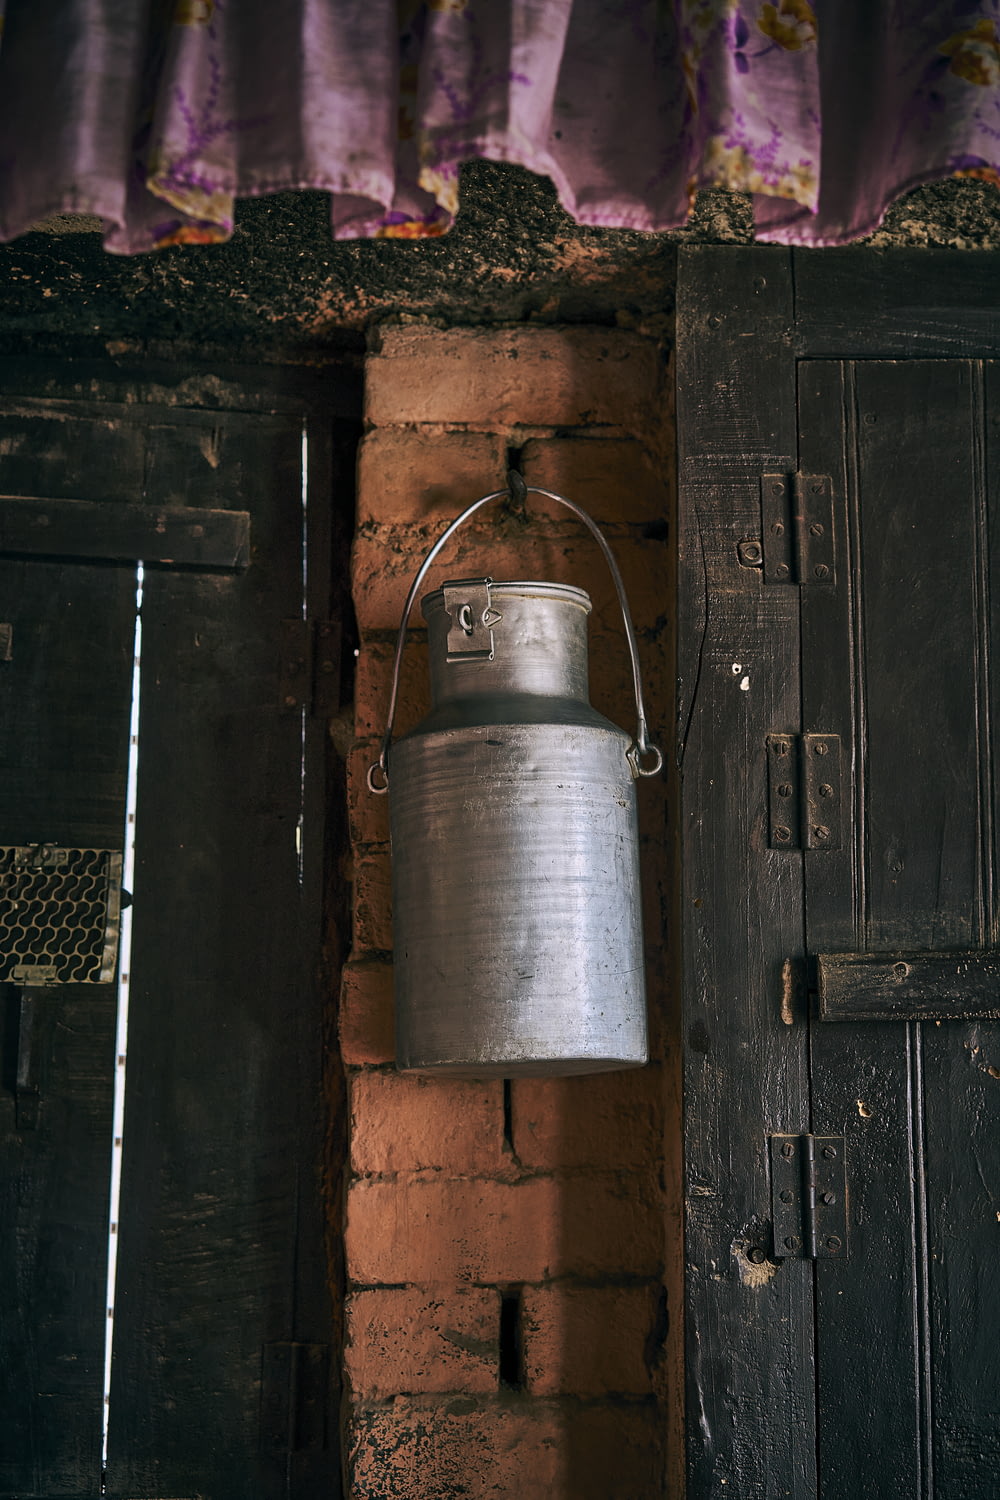 a metal bucket hanging from a brick wall